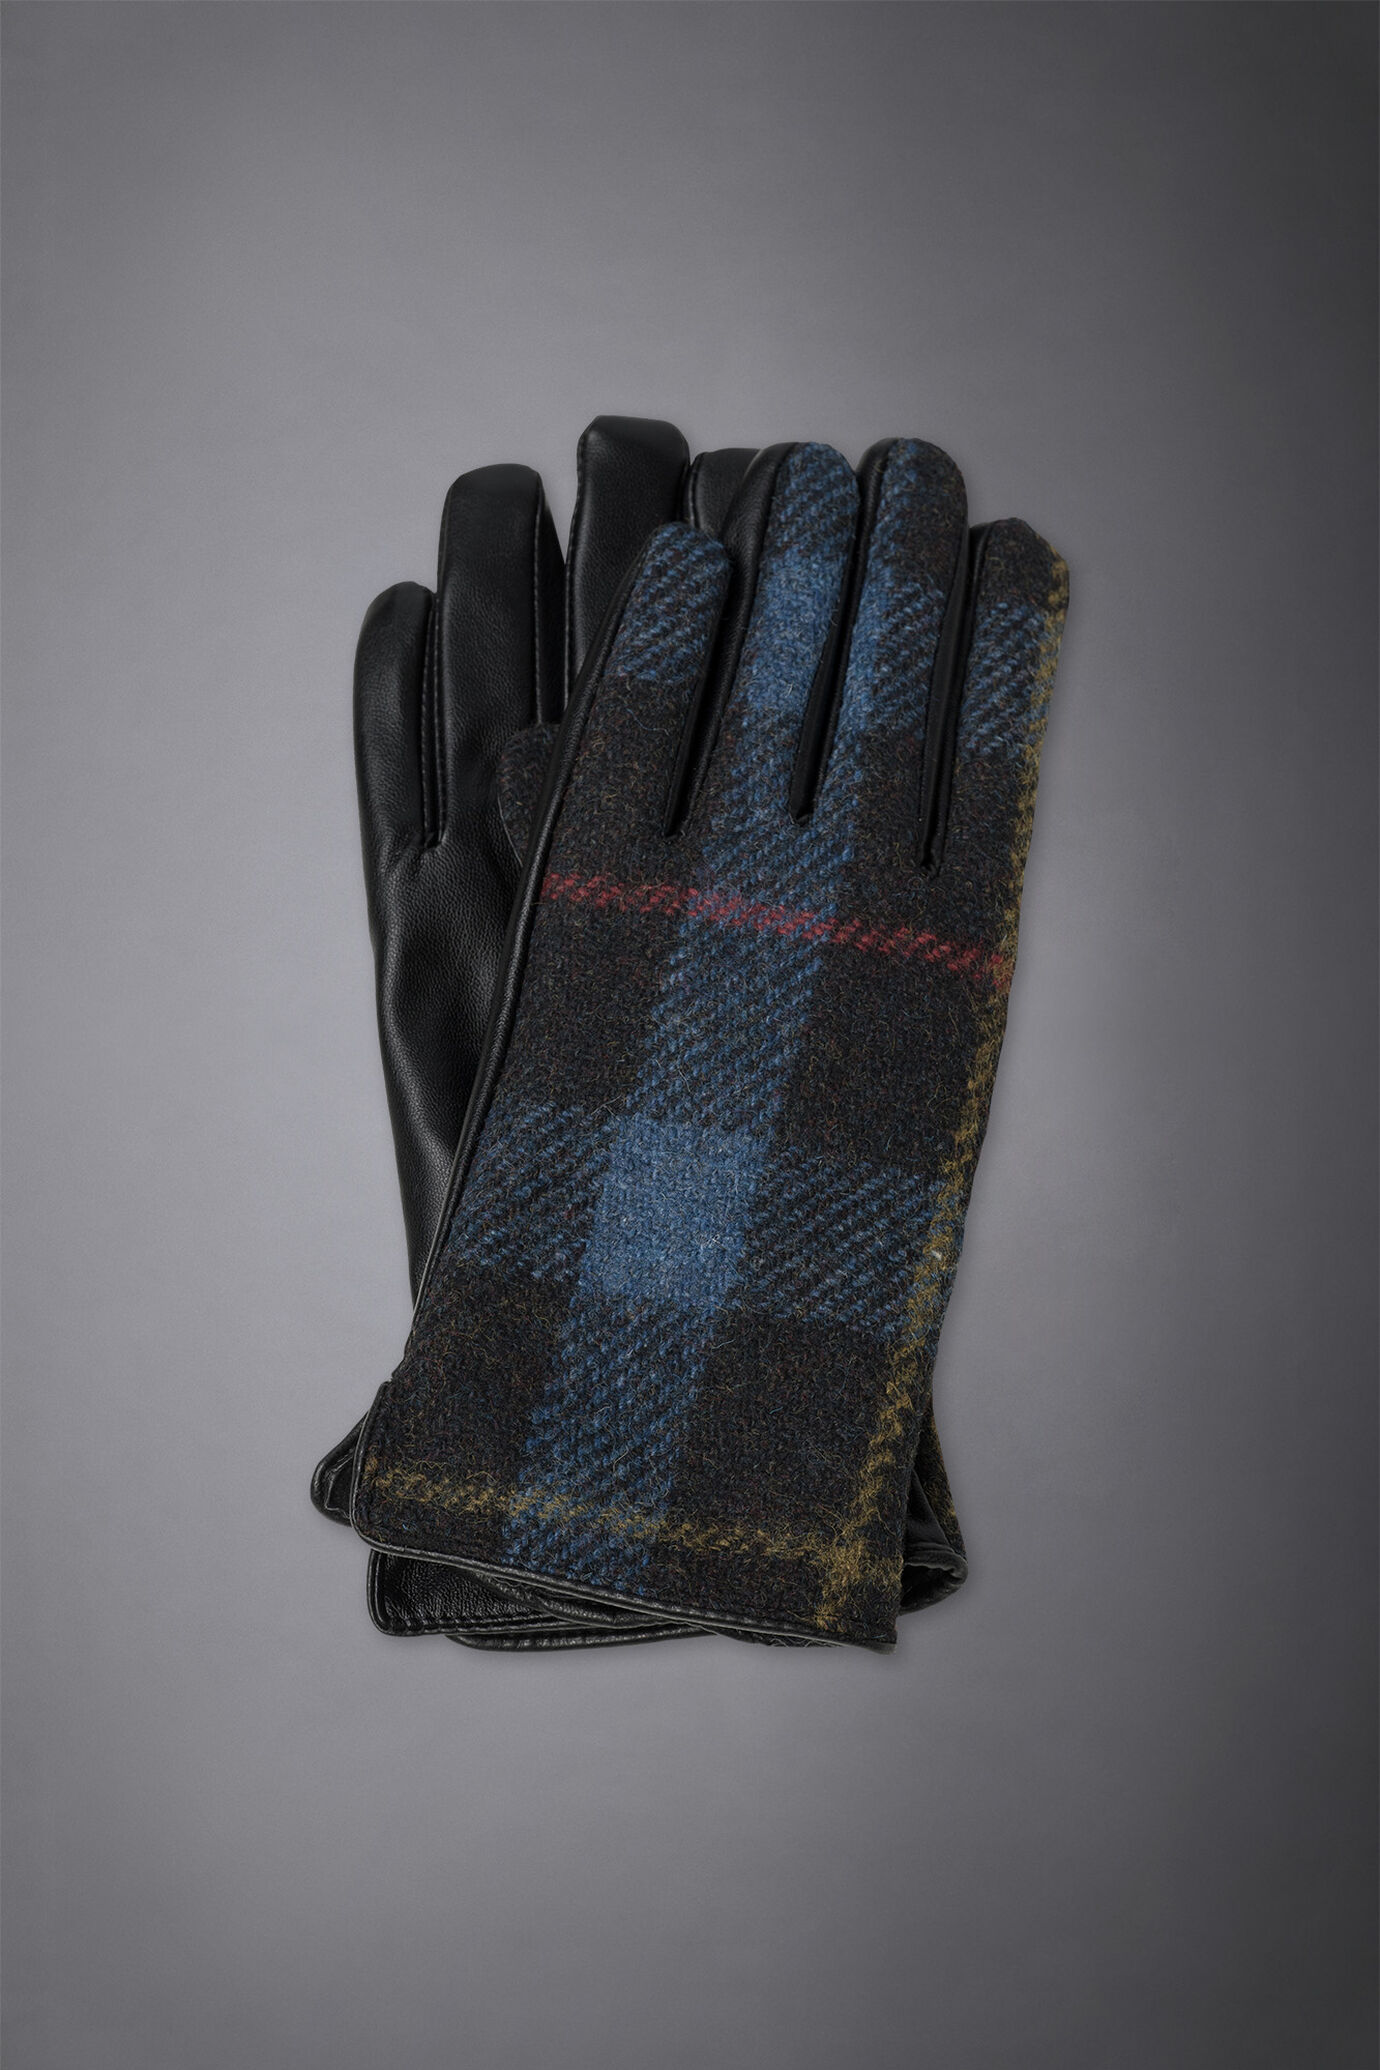 Tartan gloves with a pure wool backhand